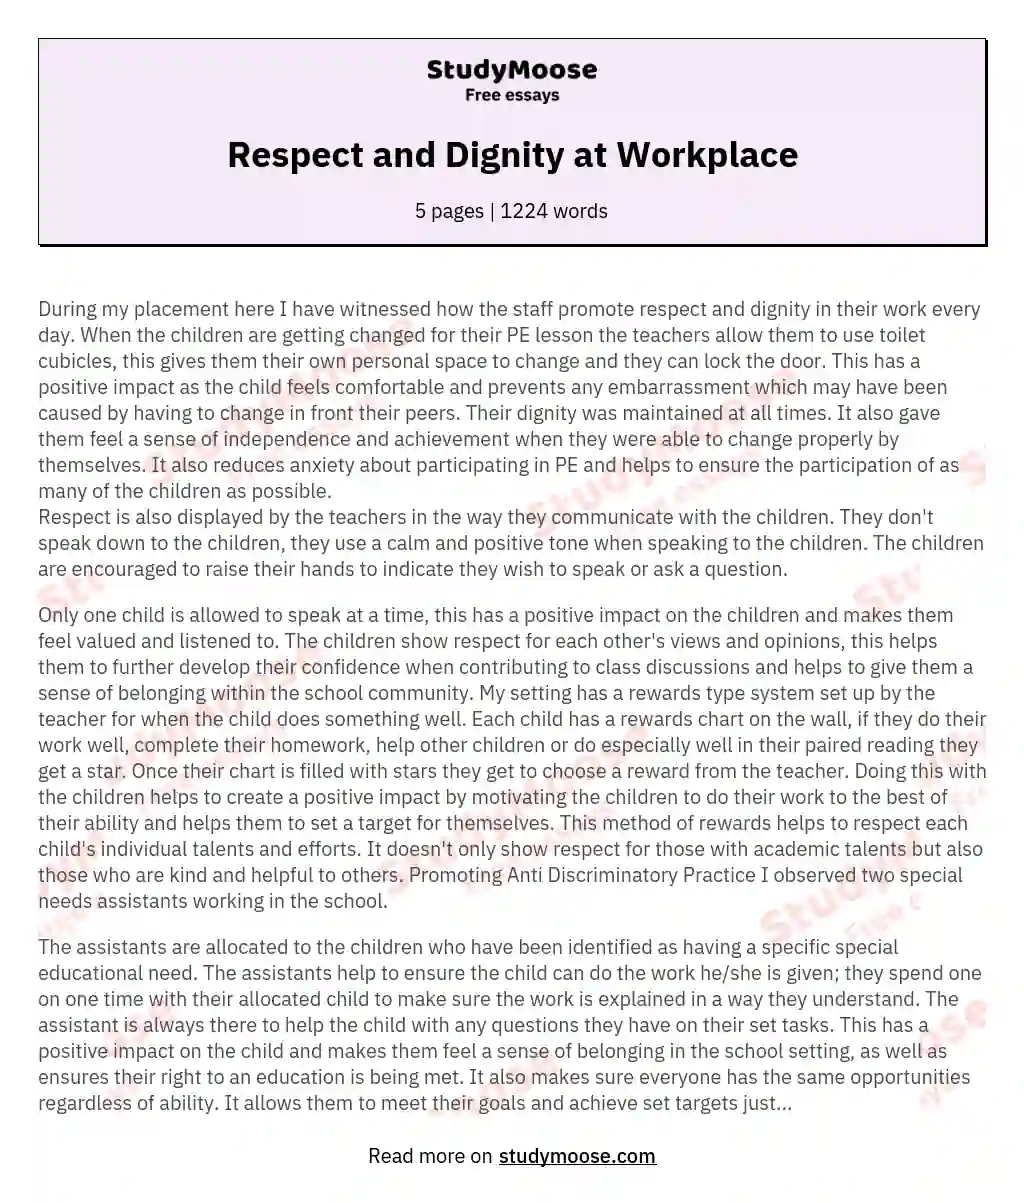 Respect and Dignity at Workplace